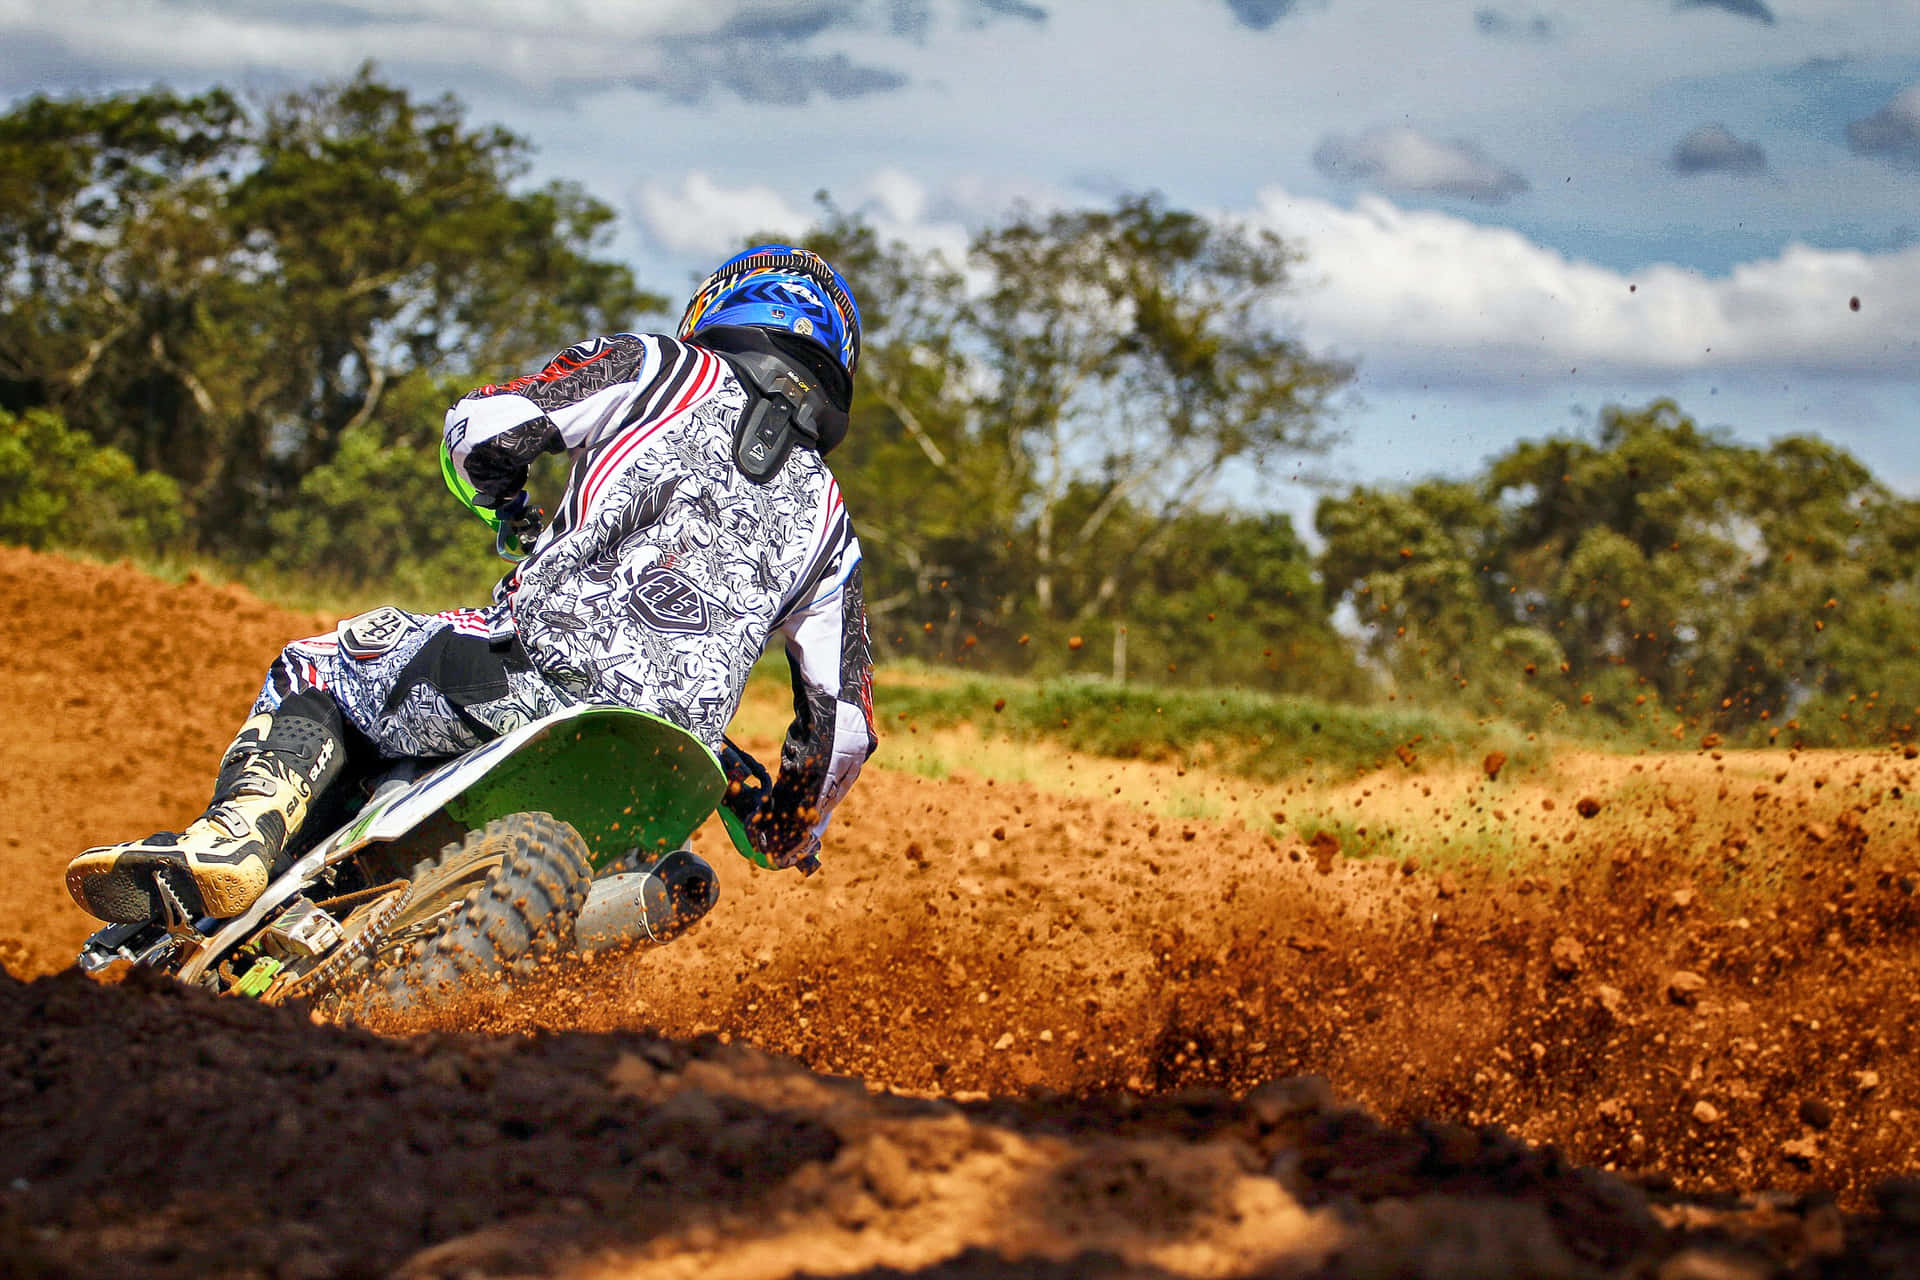 Rider conquering the trails on a dirtbike